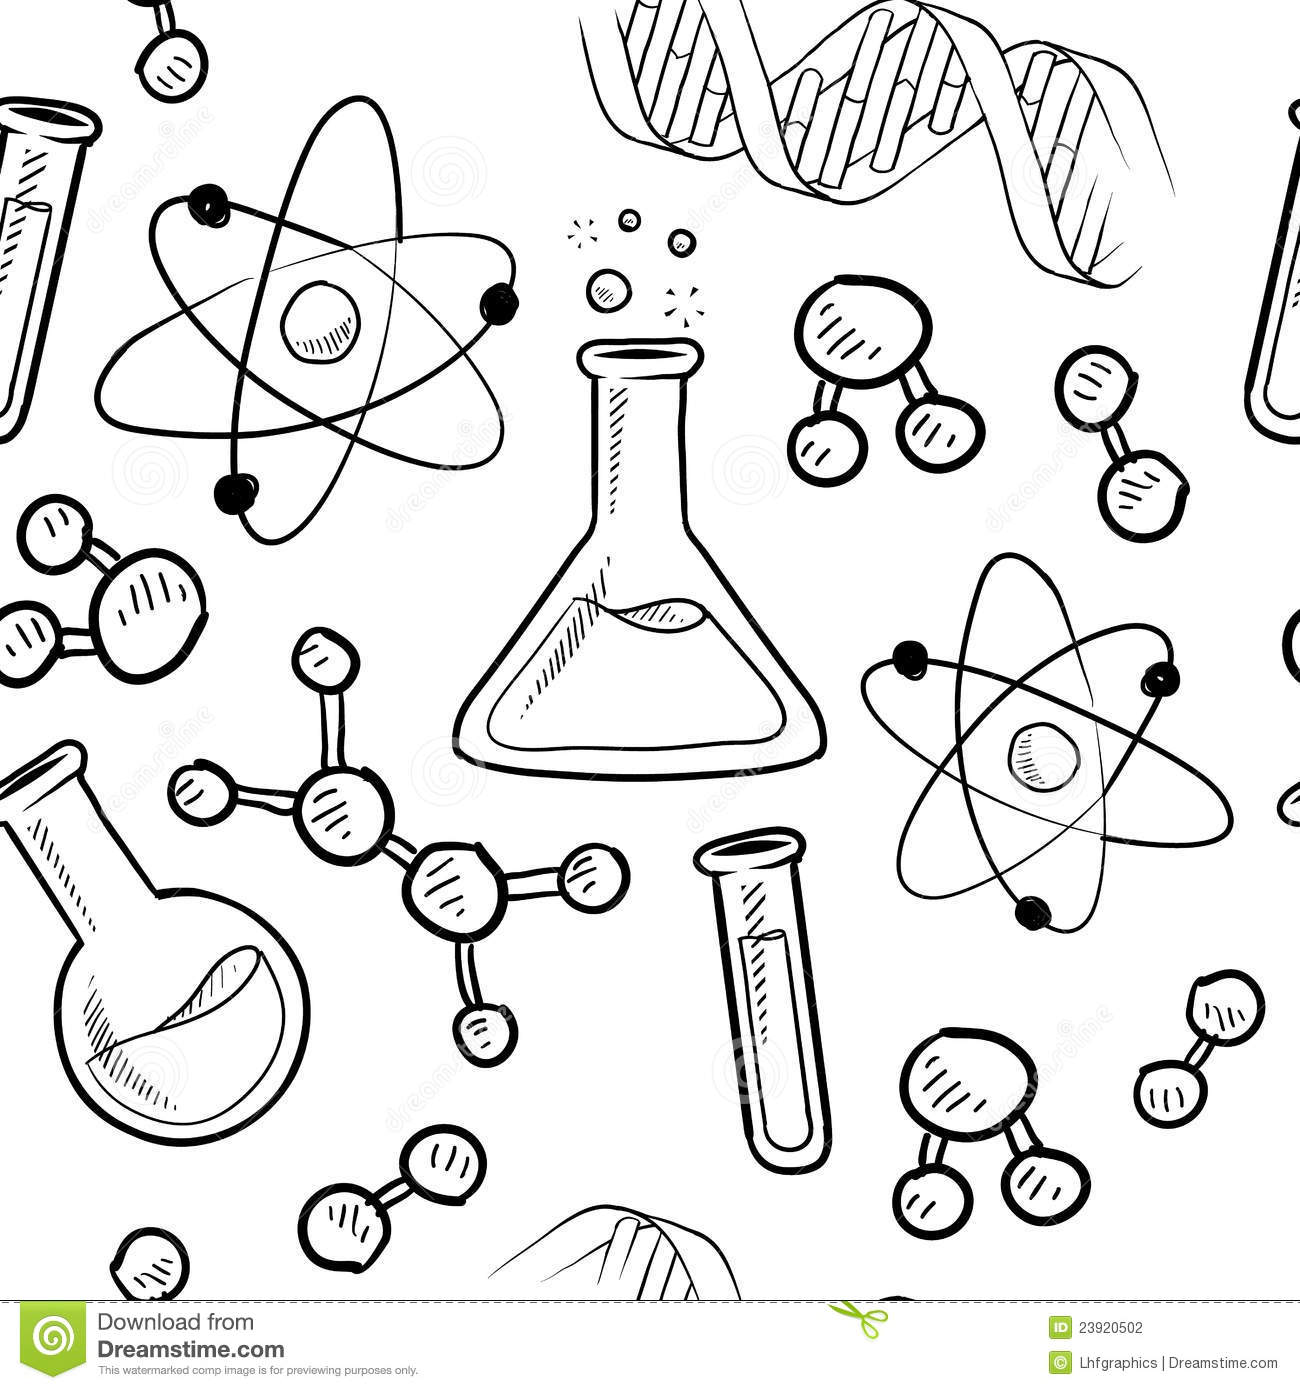 Doodle Style Seamless Science Or Laborator Background Illustration In